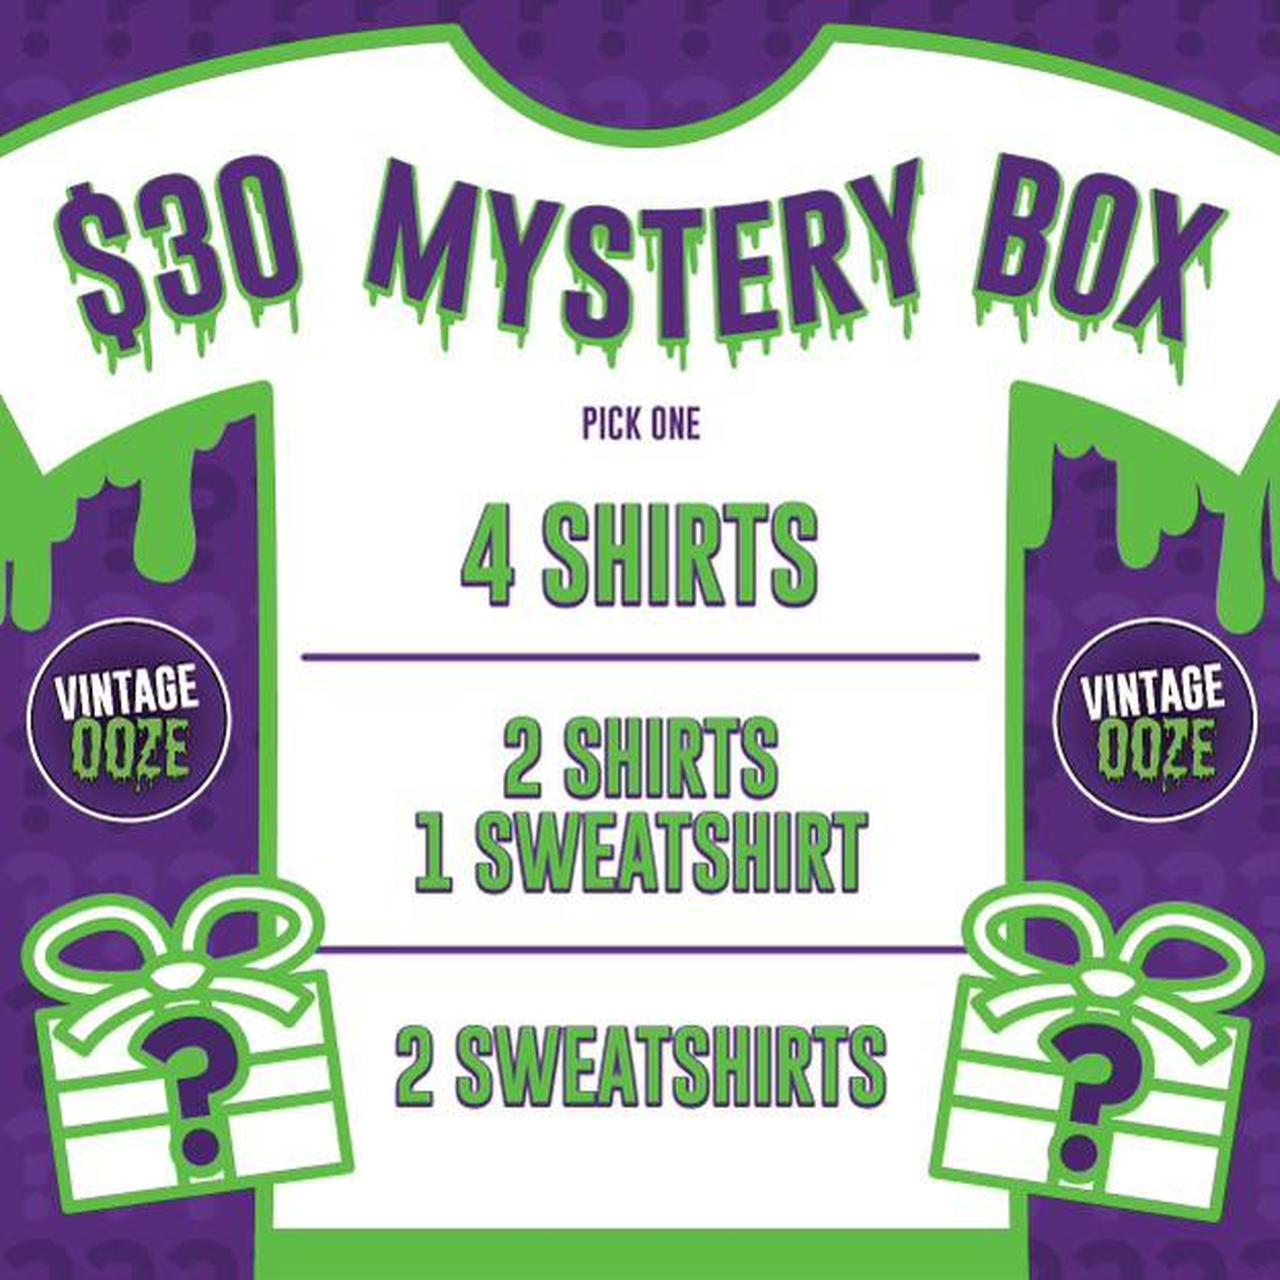  Target Mystery Box - $250+ MSRP- Home, Health, Beauty, Pets,  Outdoor, Kitchen, Kids, more.-Reselling - Miscellaneous - Oceanside,  California, Facebook Marketplace